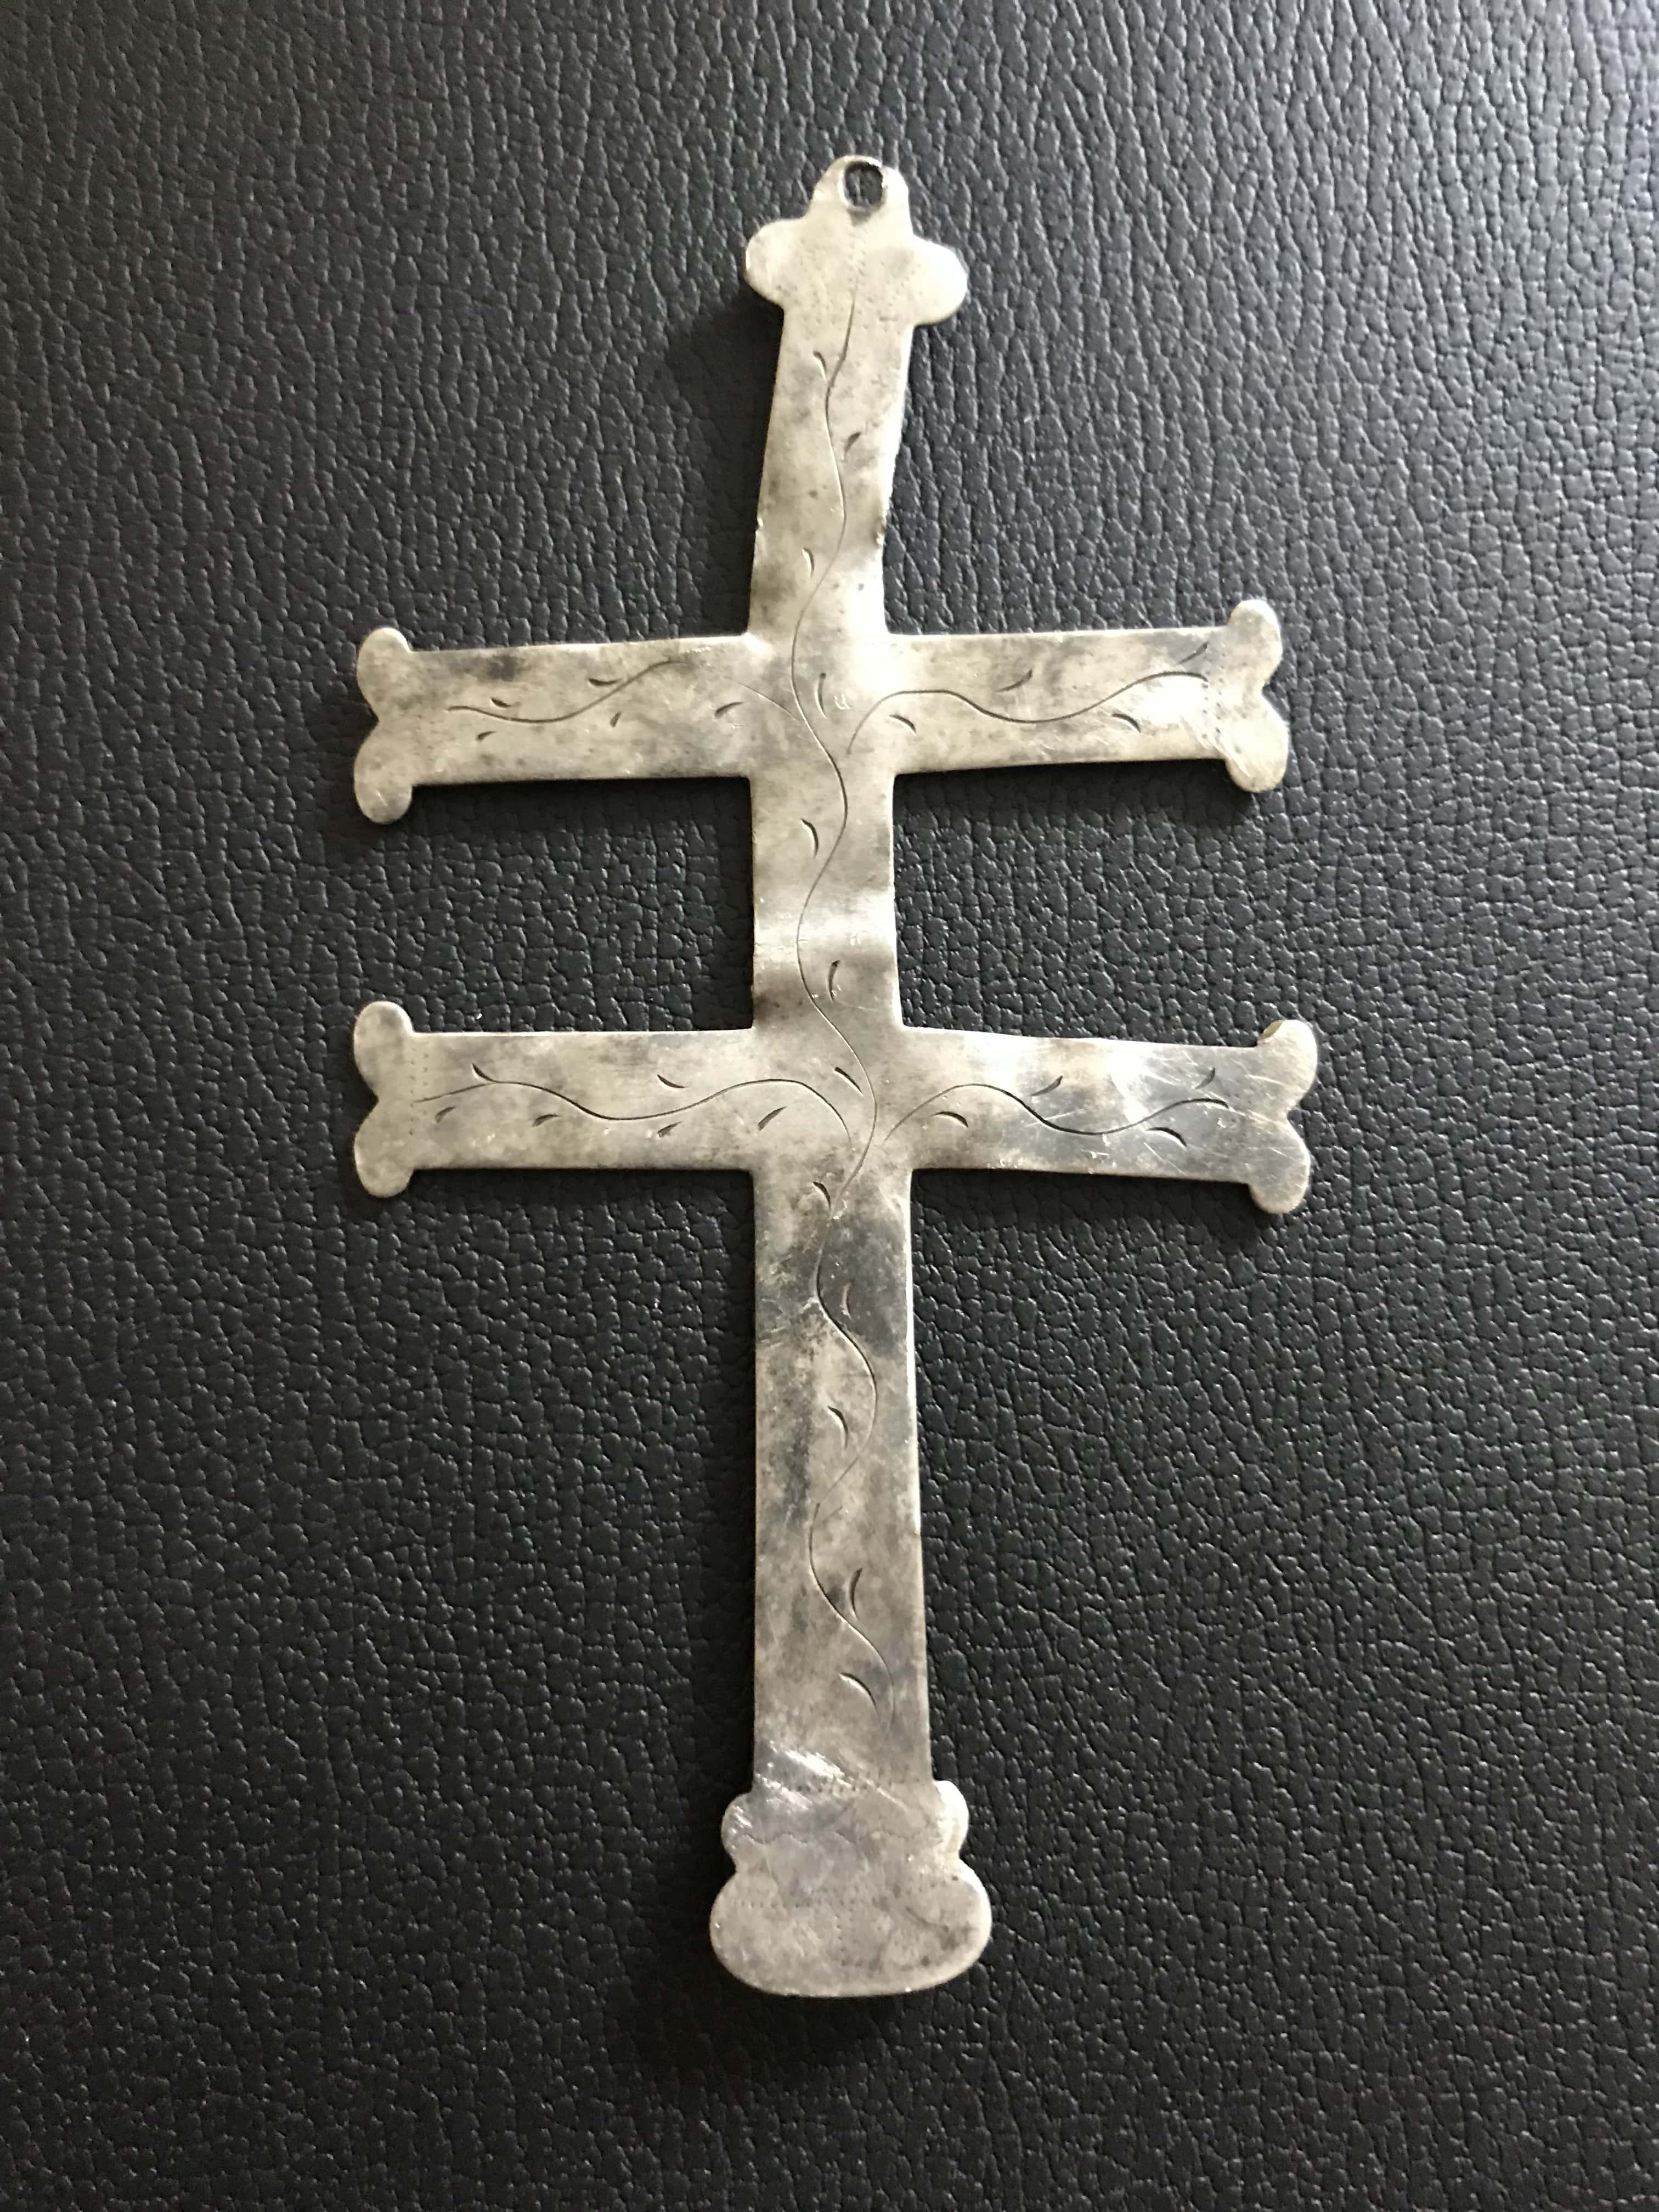 Silver Trade Cross with Wavy Vine-like Lines Up and Down the Cross